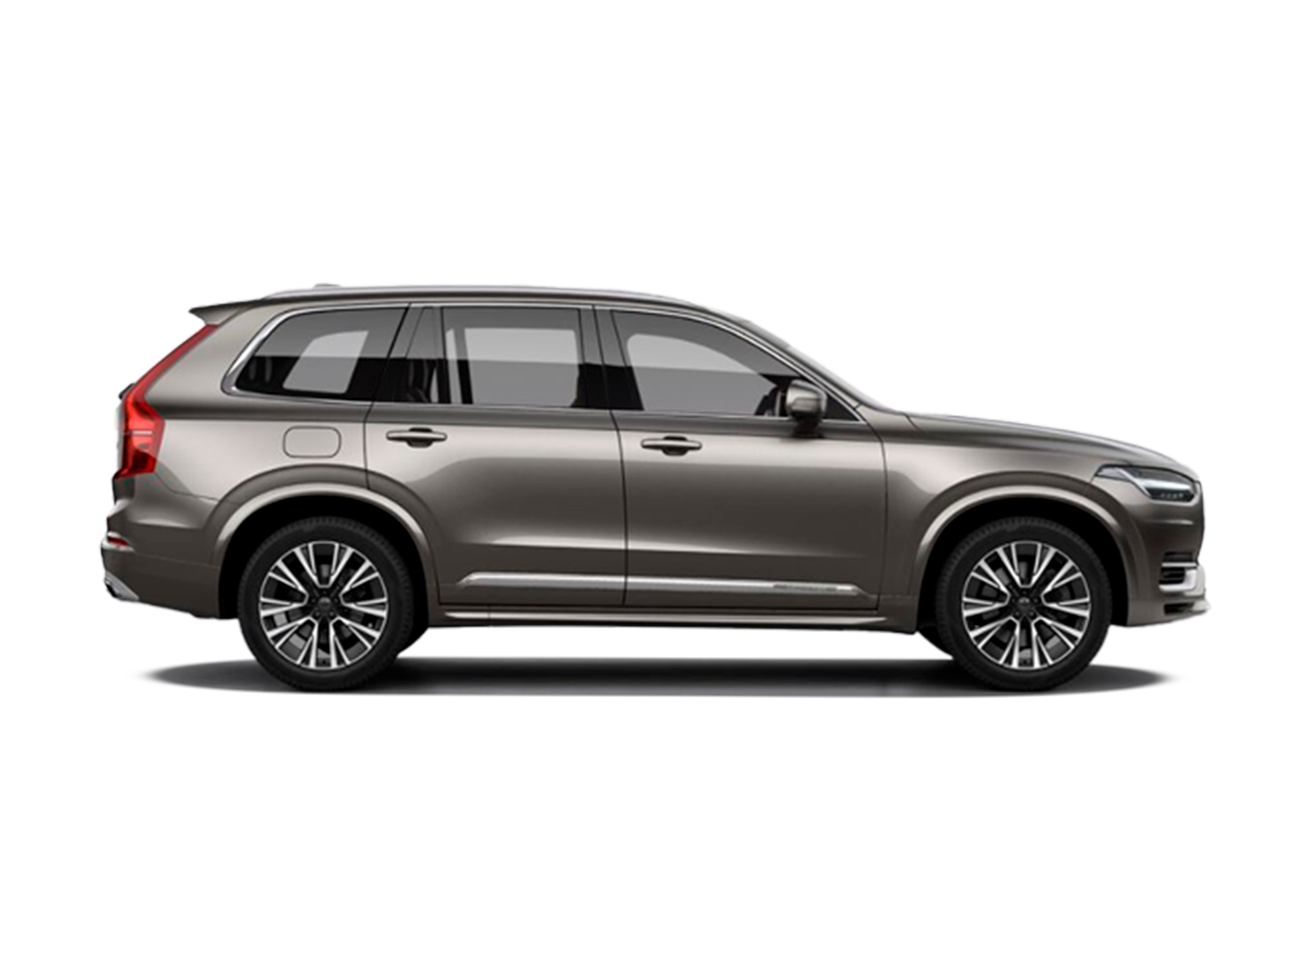 2.0 T8 HYBRID INSCRIPTION EXPRESSION AWD GEARTRONIC